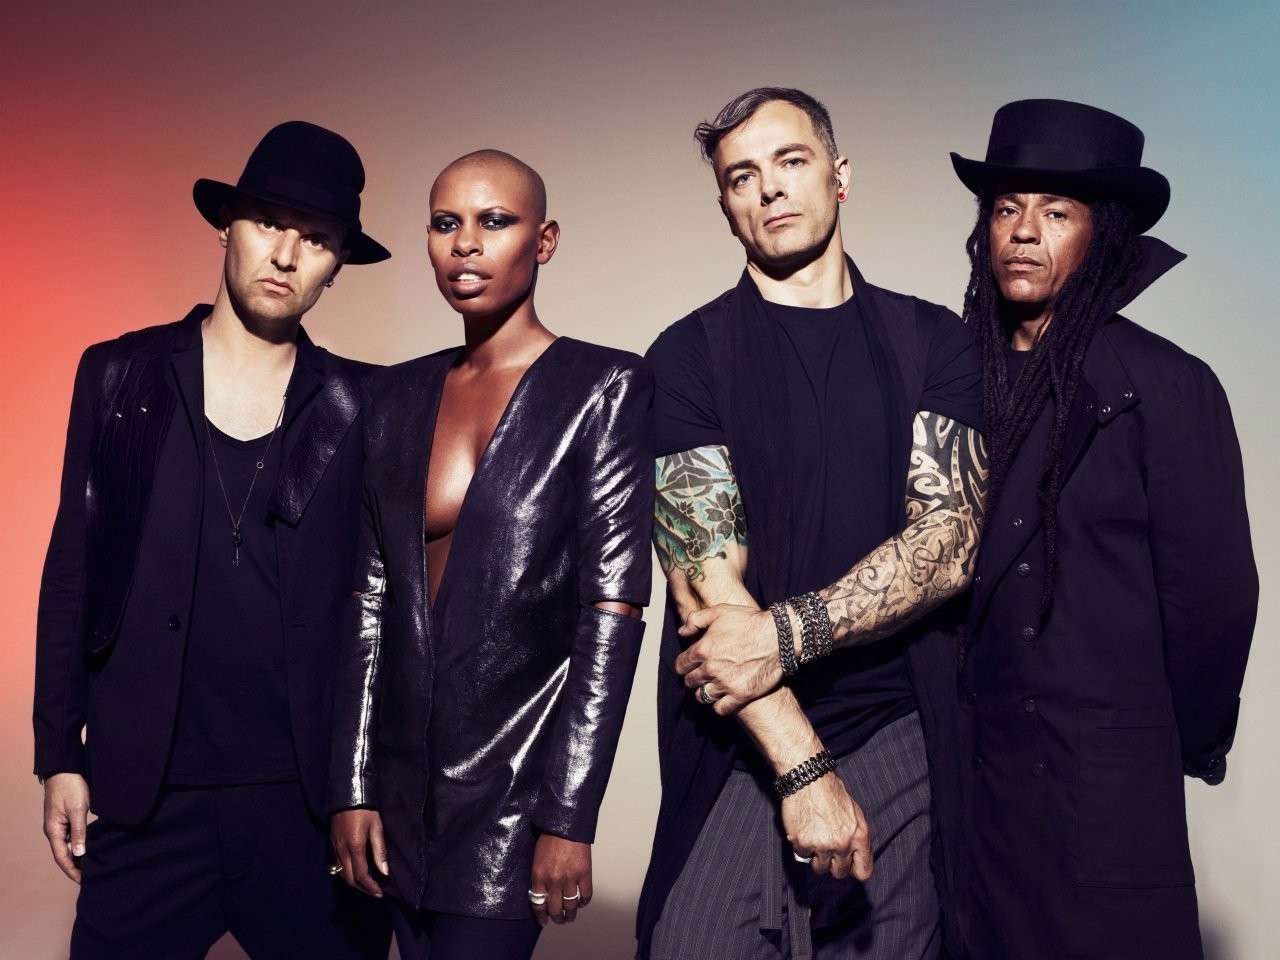 Skunk Anansie
Singer Skin was and is one of the finest front-women in rock n roll, while Ace remains one of music's nice guys and a great guitarist. They blended genres with beautiful abandon, and came out with a hard-hitting sound, Check out "Little Baby Swastikkka."